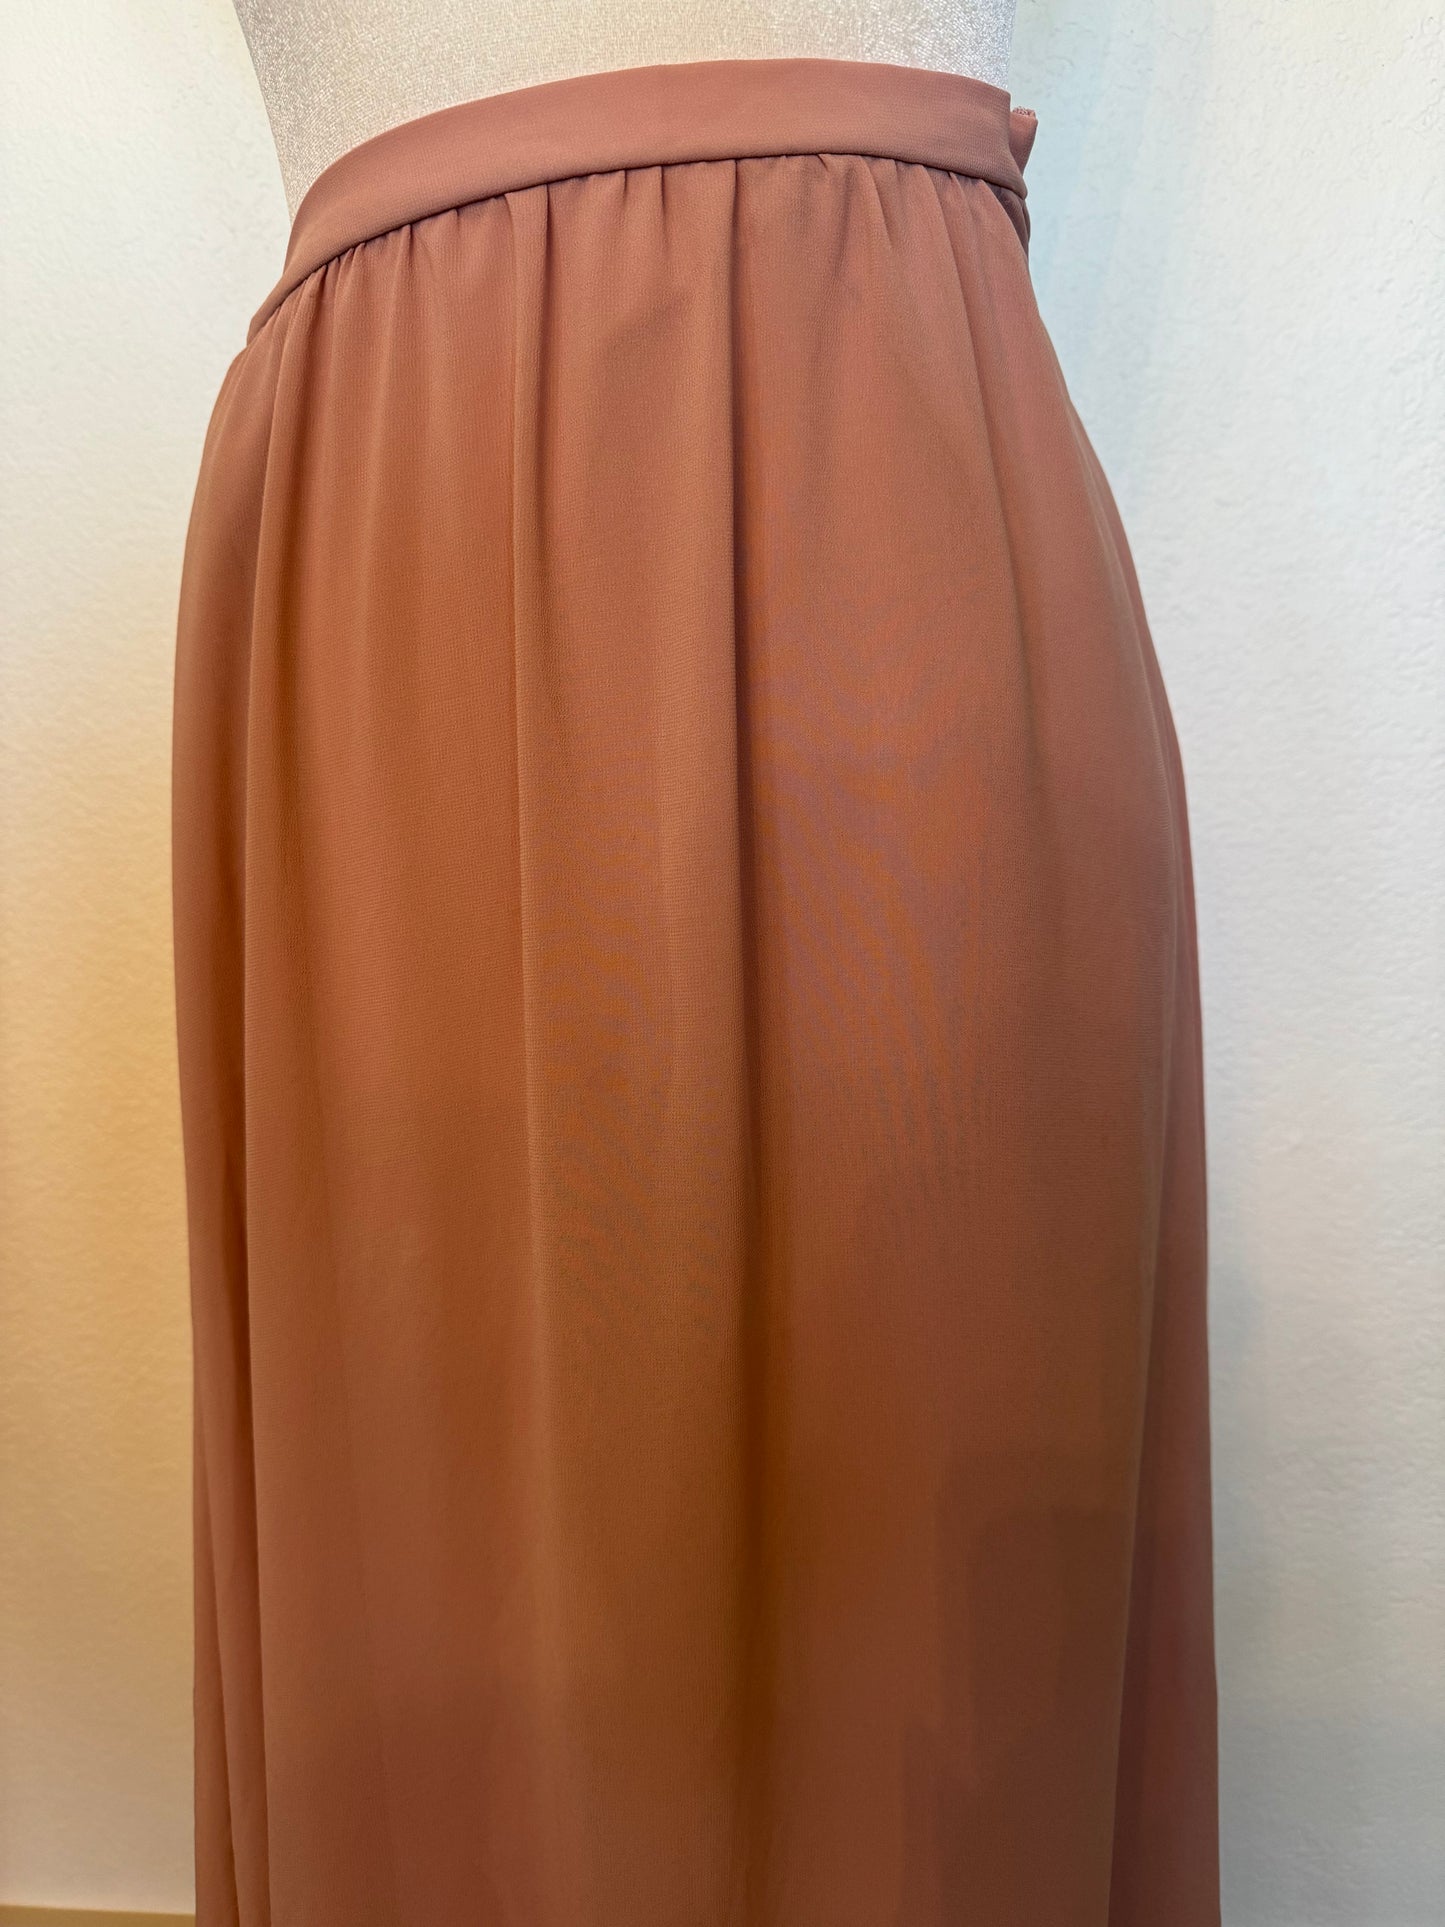 Space 46 Dusty Rose Maxi Skirt